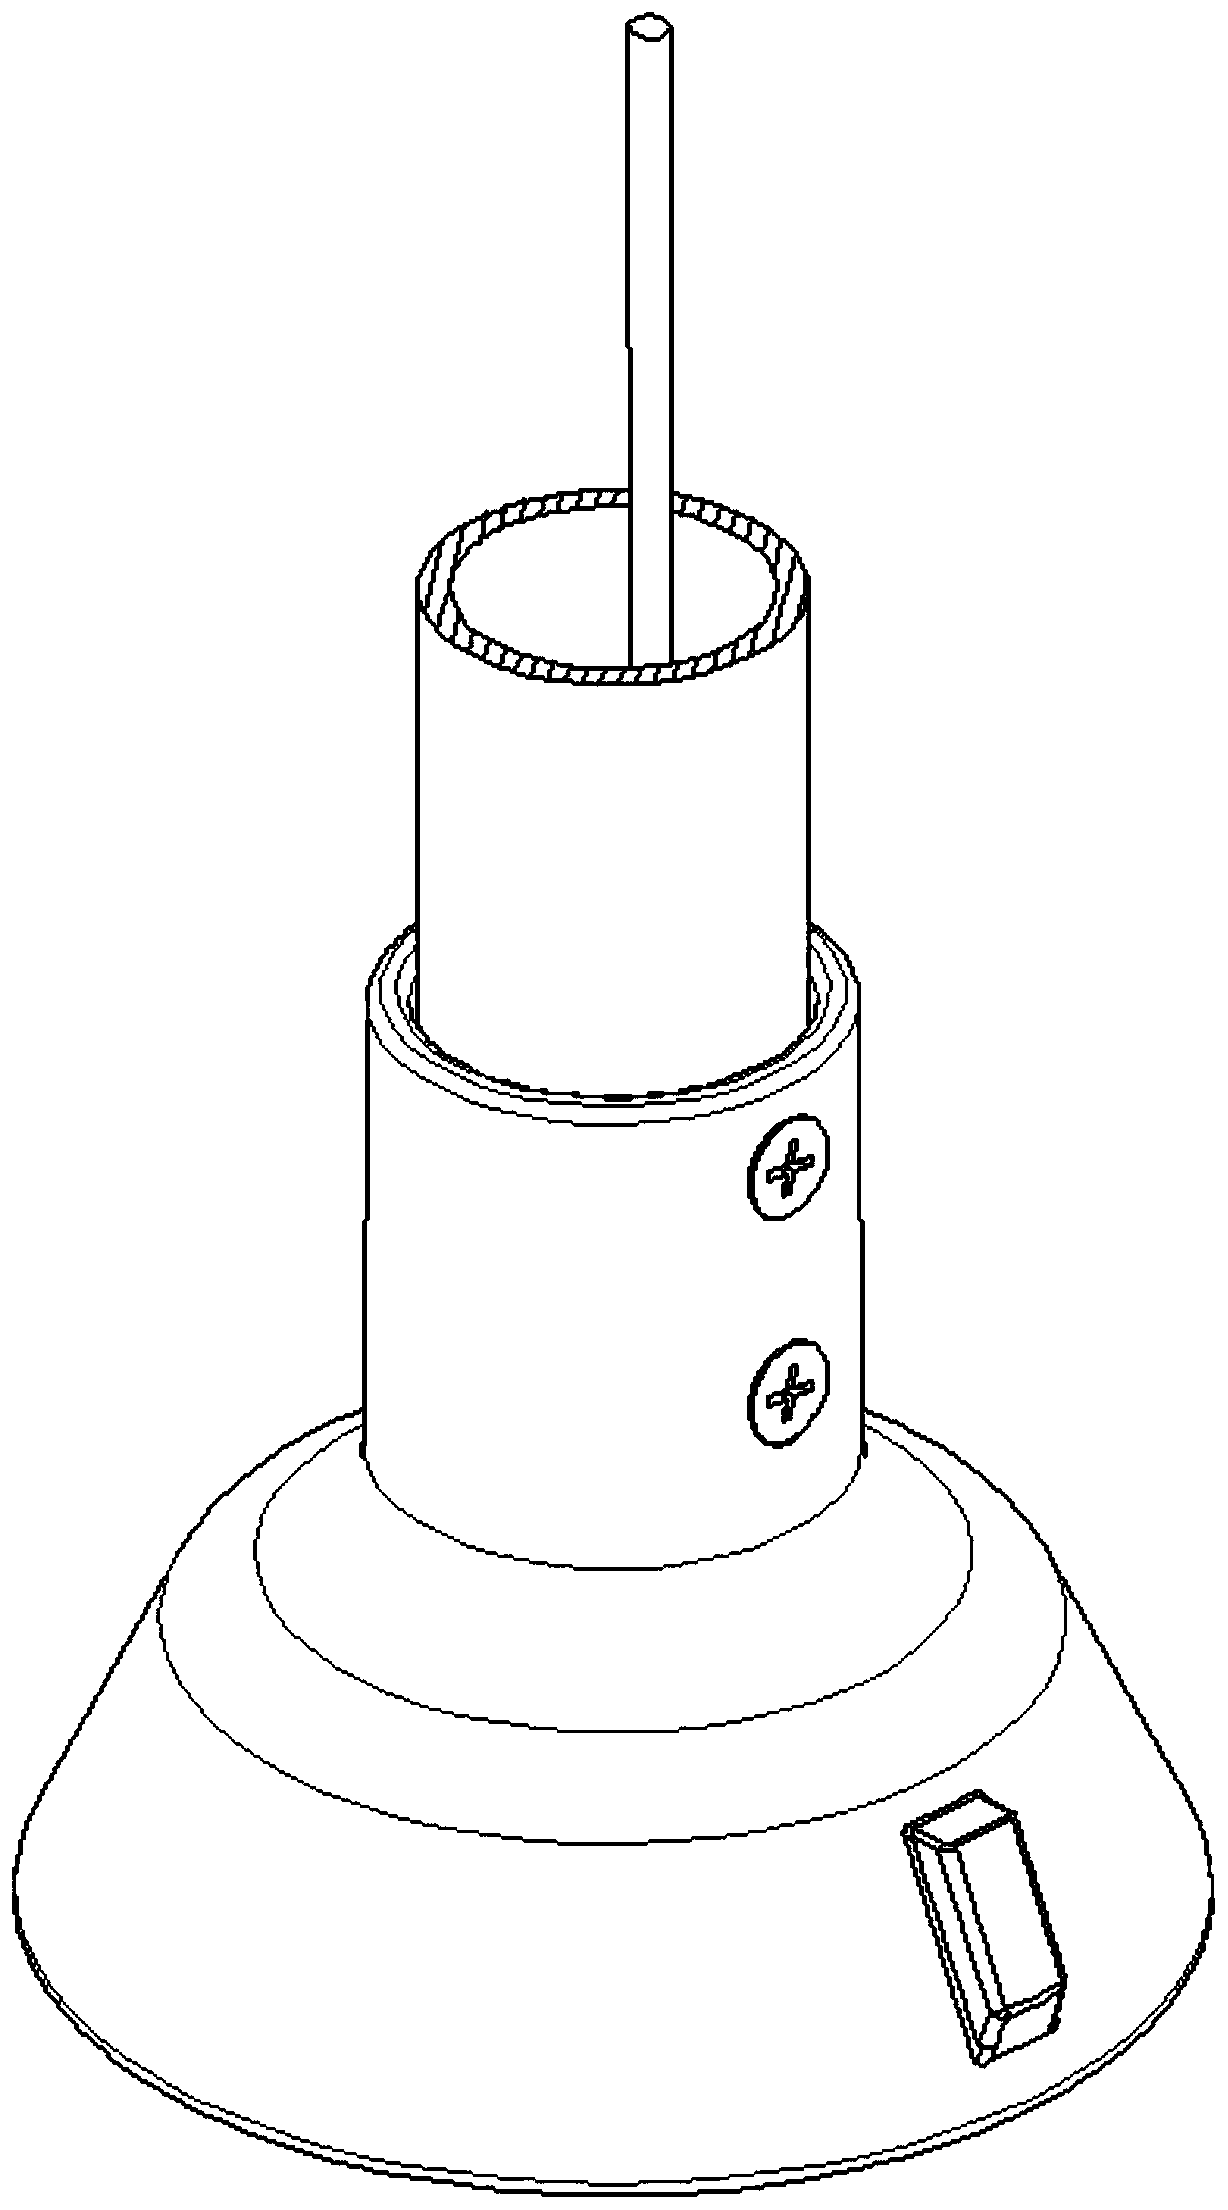 Fence vertical column base with locking function